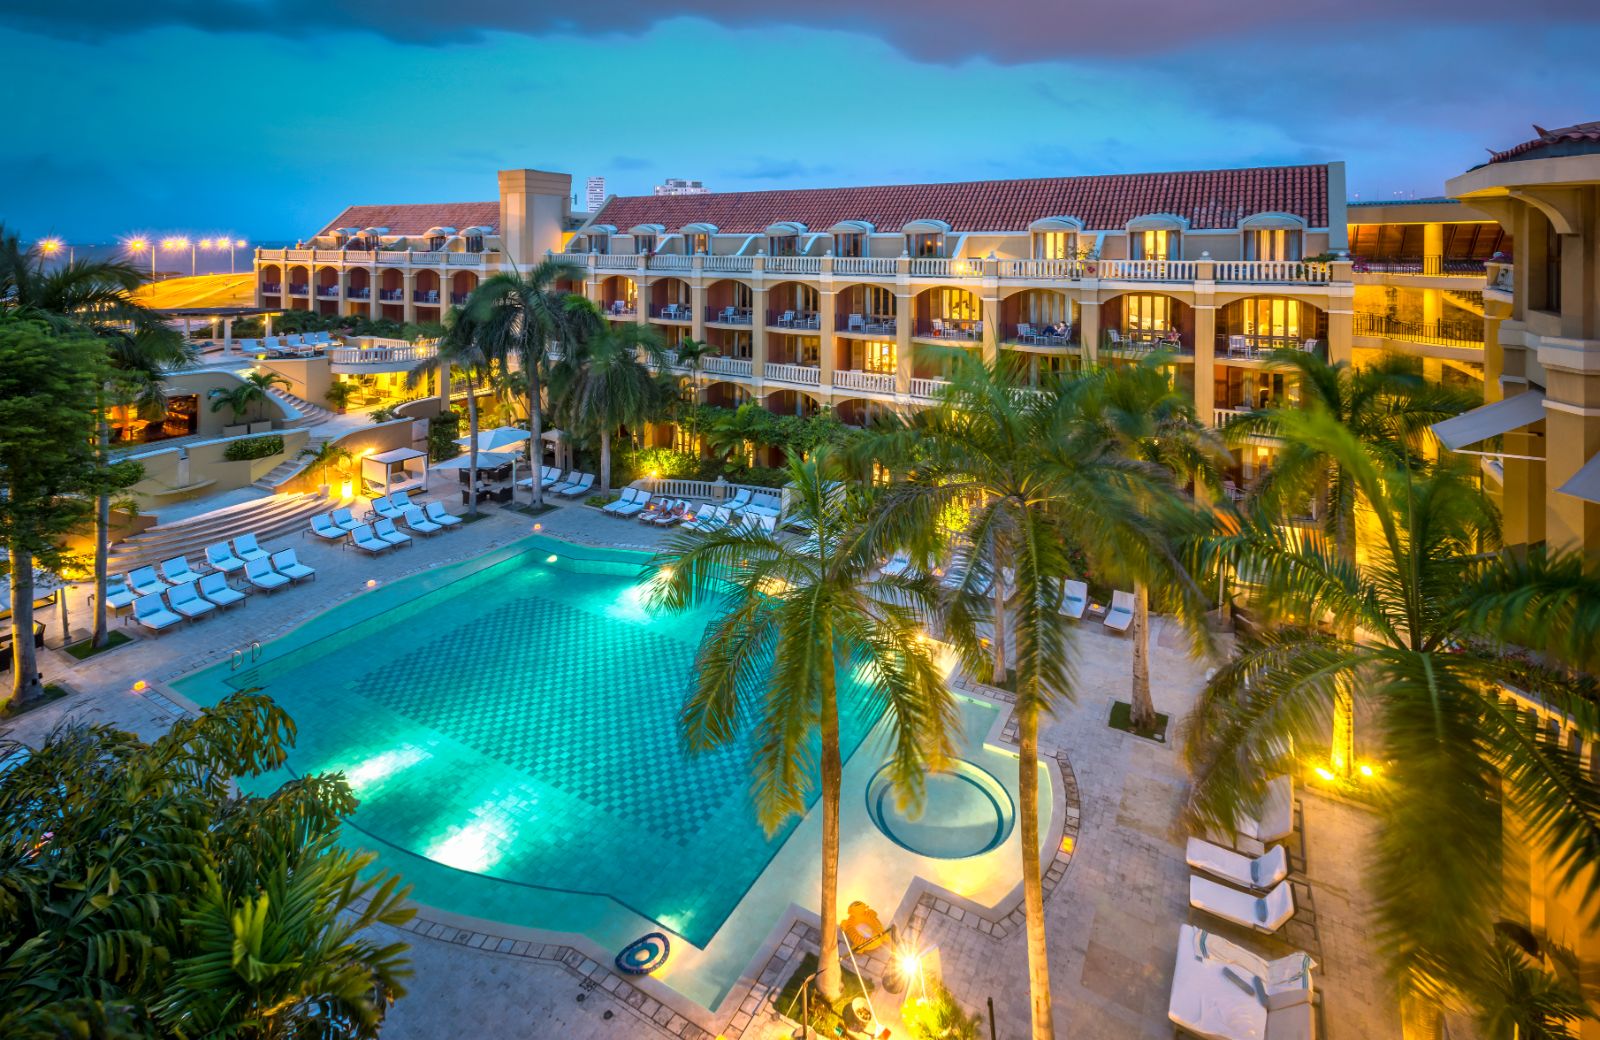 Aerial view of the poolside at Sofitel Legend Santa Clara in Cartagena, Colombia